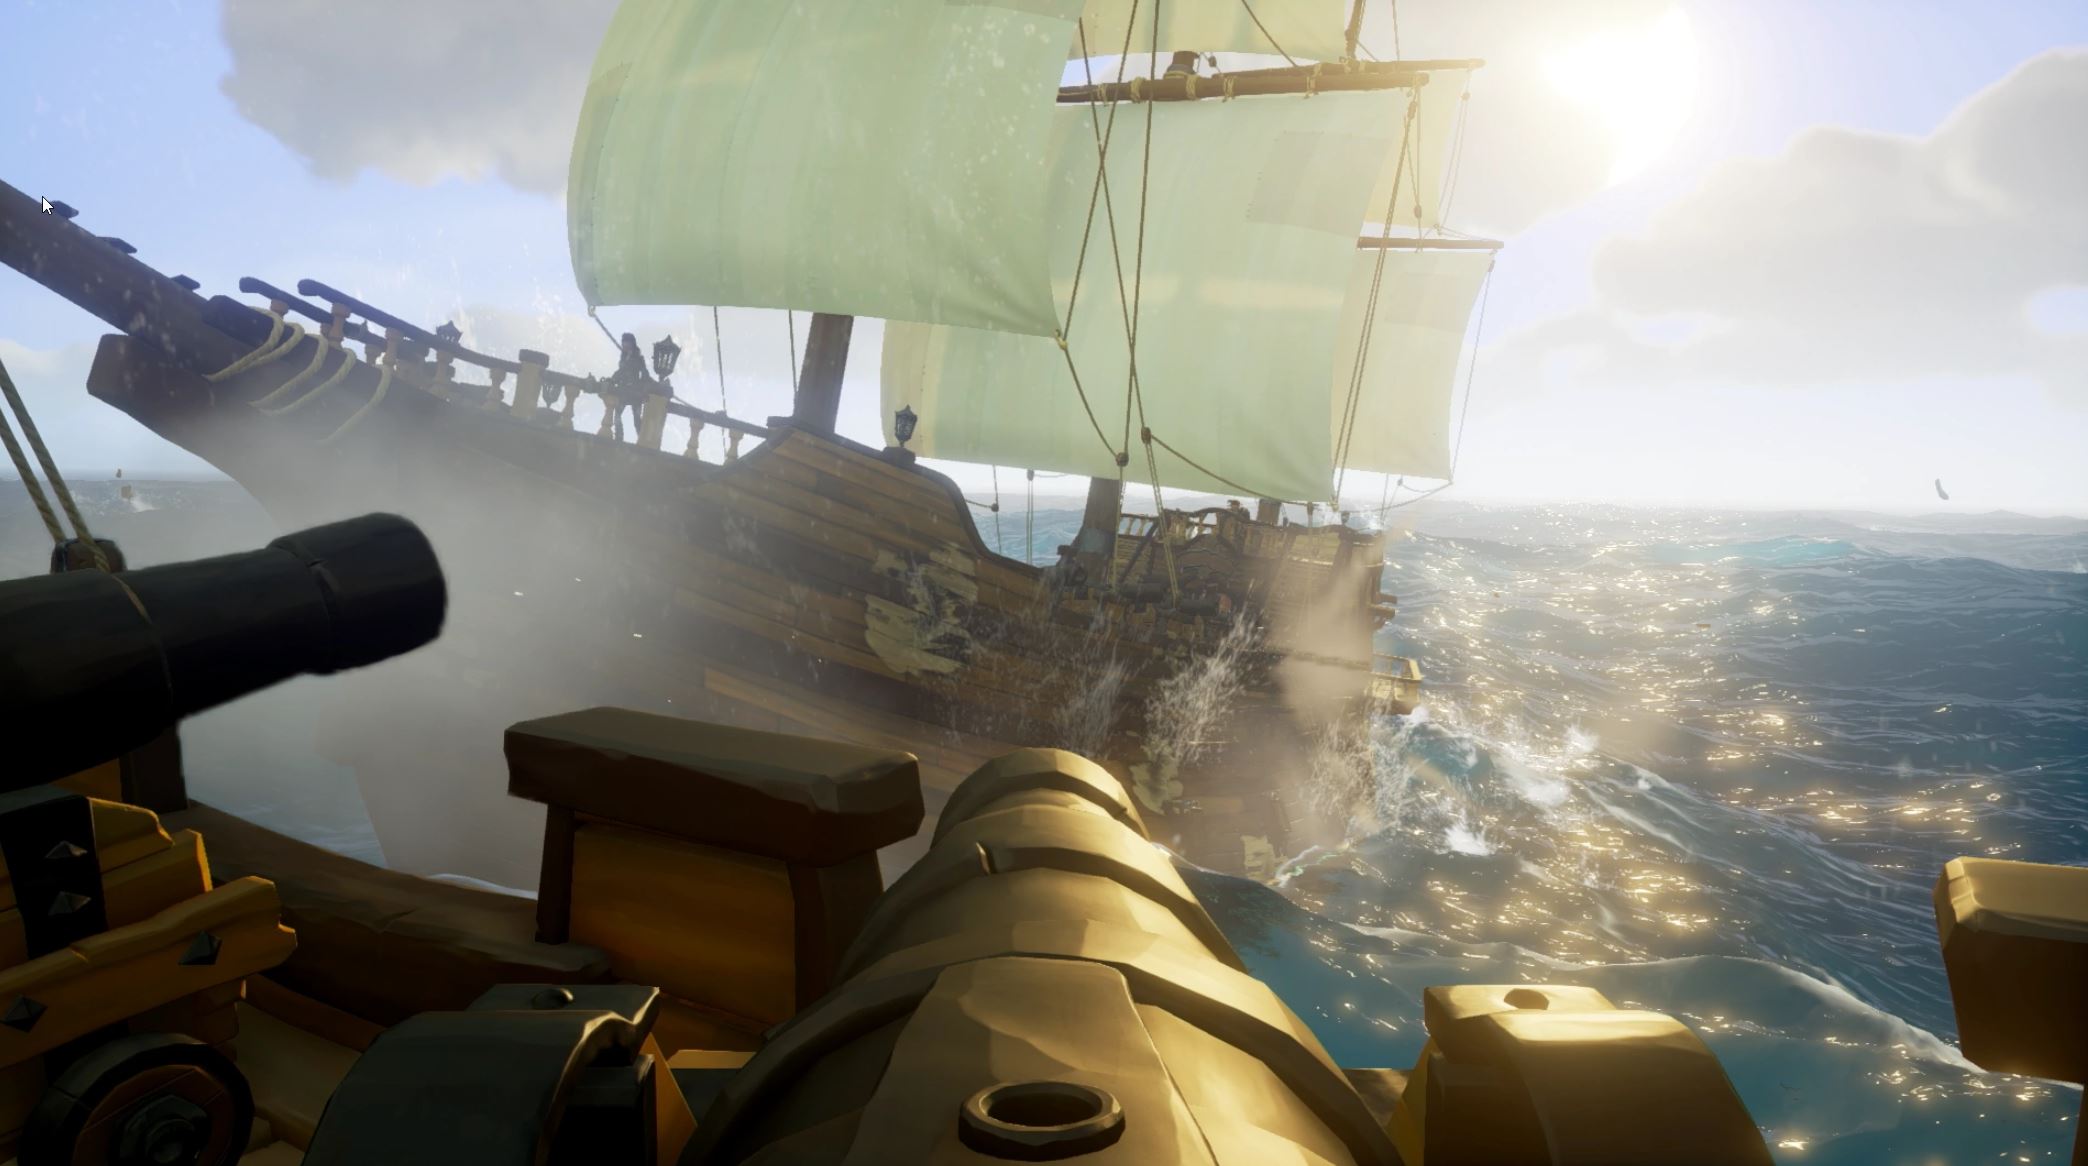 Sea of Thieves Tips